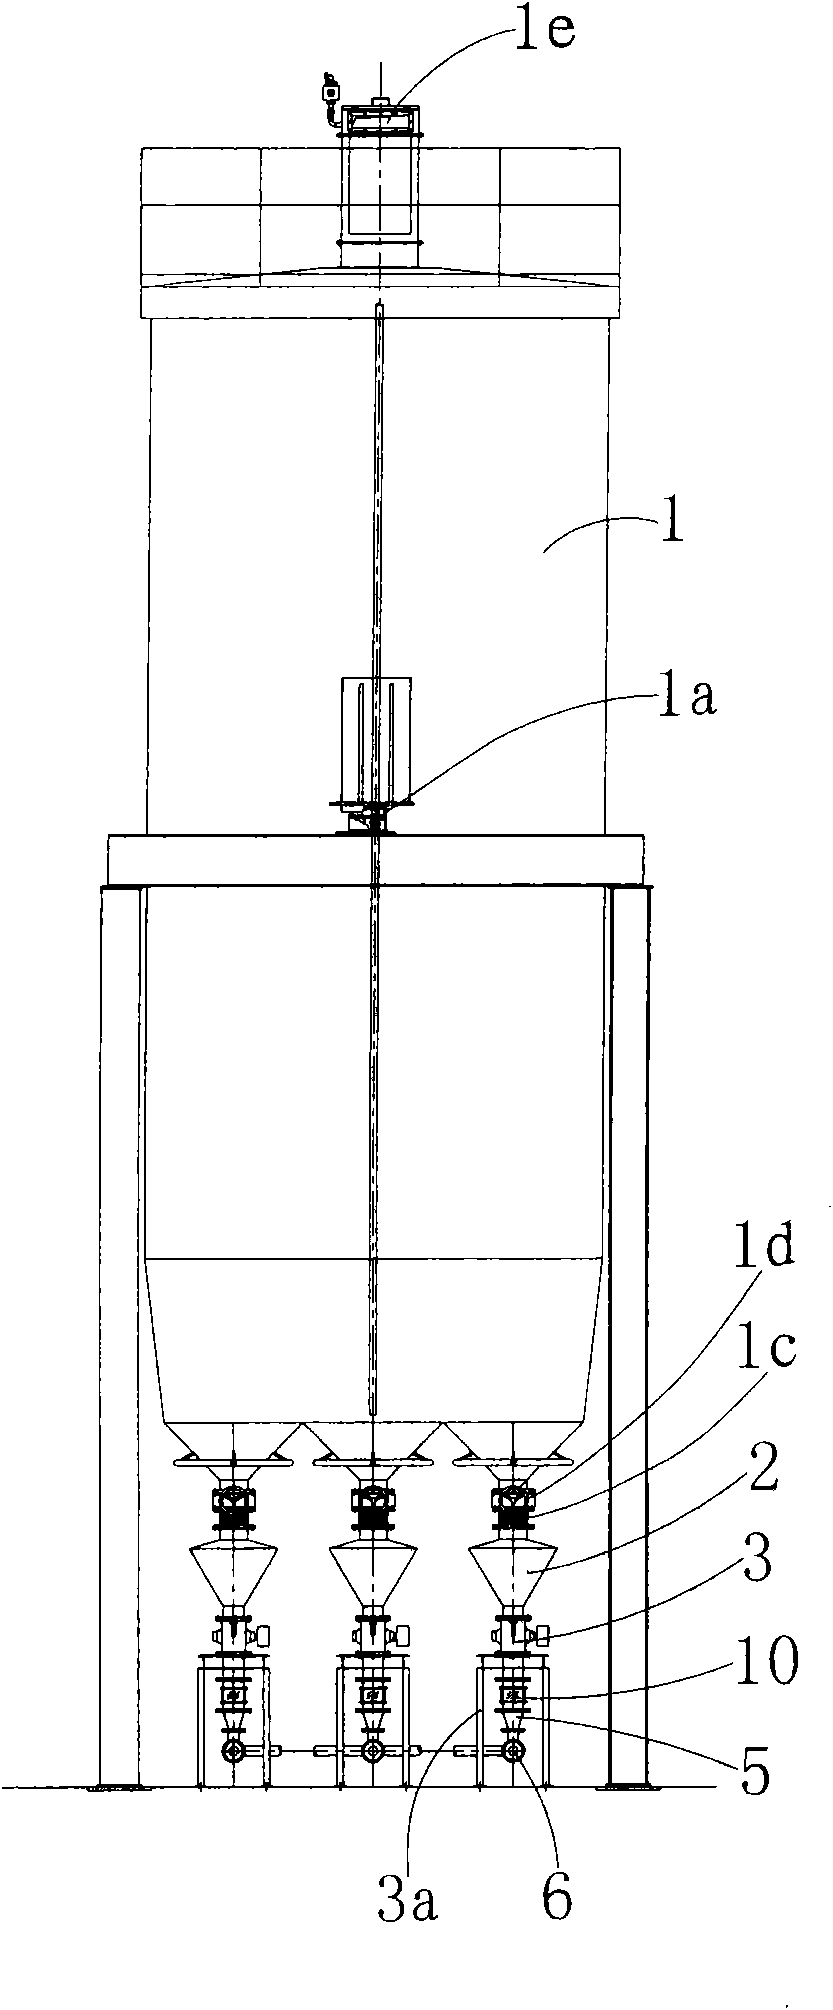 Petroleum coke powder combustion transporting device for improved industrial furnace